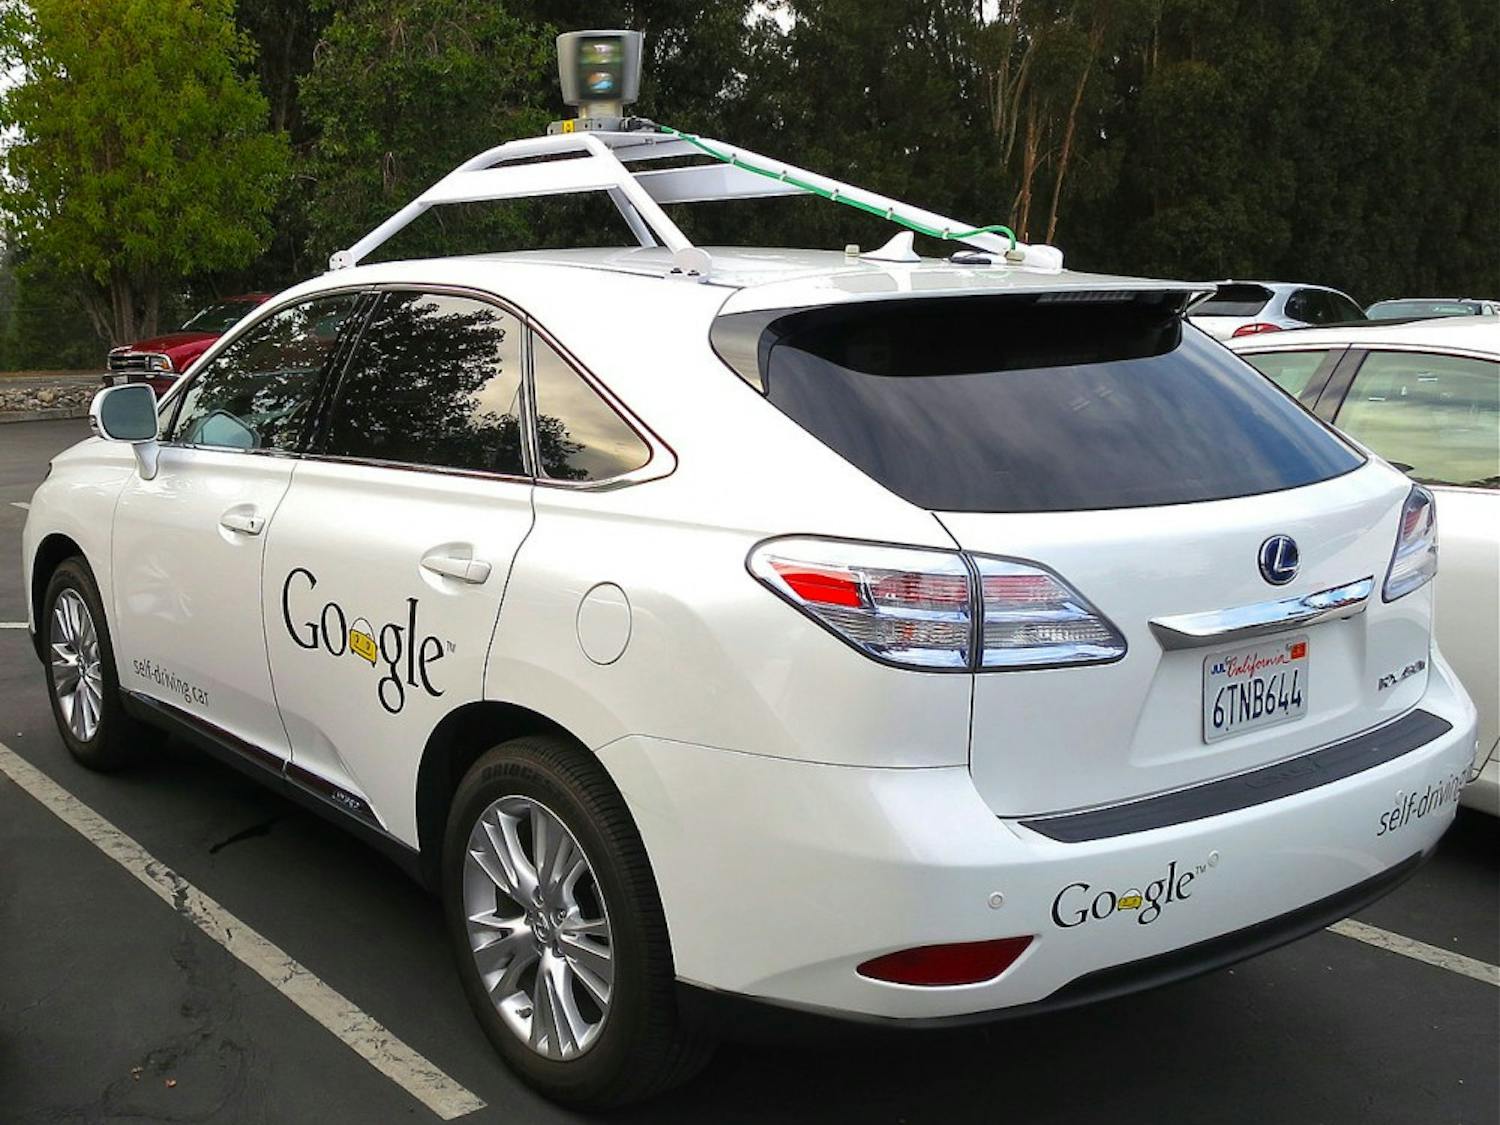 Companies like Google have already started street testing their own versions of self-driving cars.&nbsp;